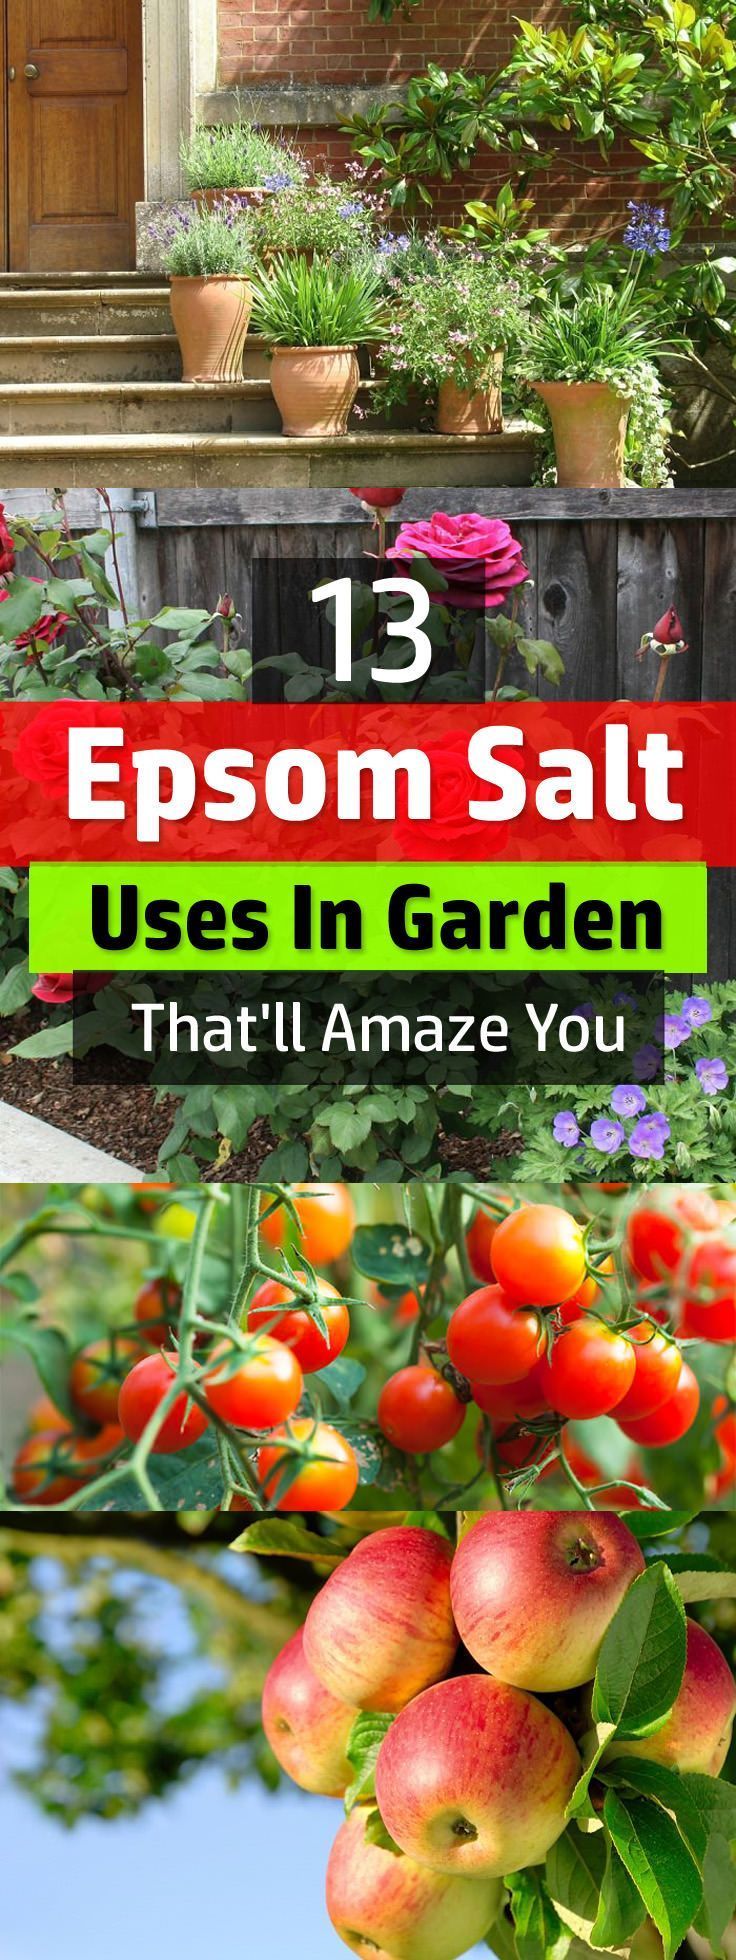 Those who use it swear that using Epsom salt on plants make them lush and healthier. Find out yourself, see these 13 Epsom salt